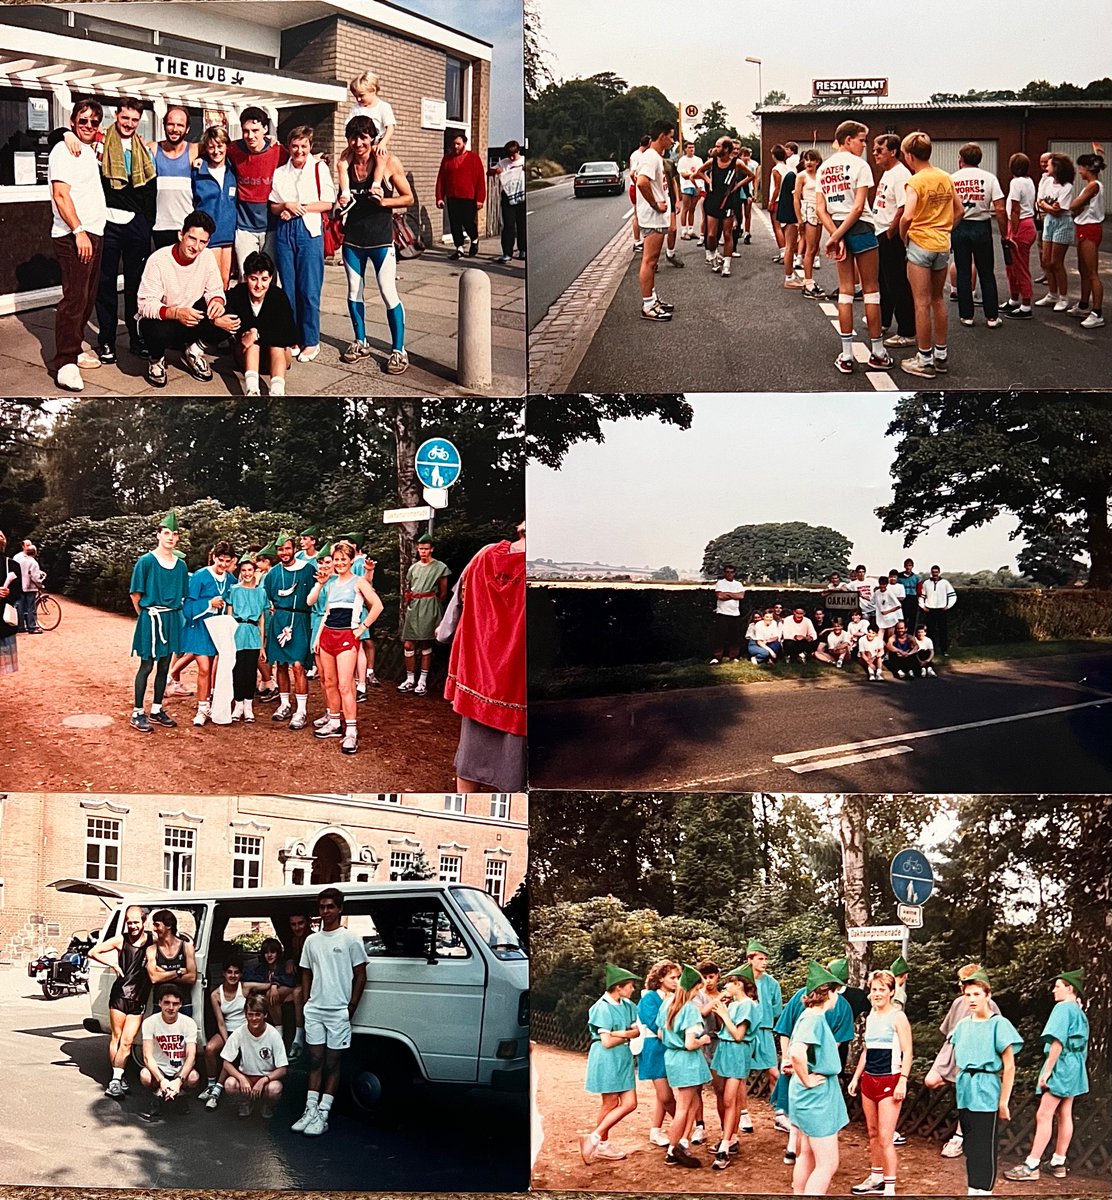 In 1988 we ran from Oakham to Barmstedt on a town twinning exercise. 35 years later two new peeps responsible for maintaining the connection. Let’s hope they do. #Rutland